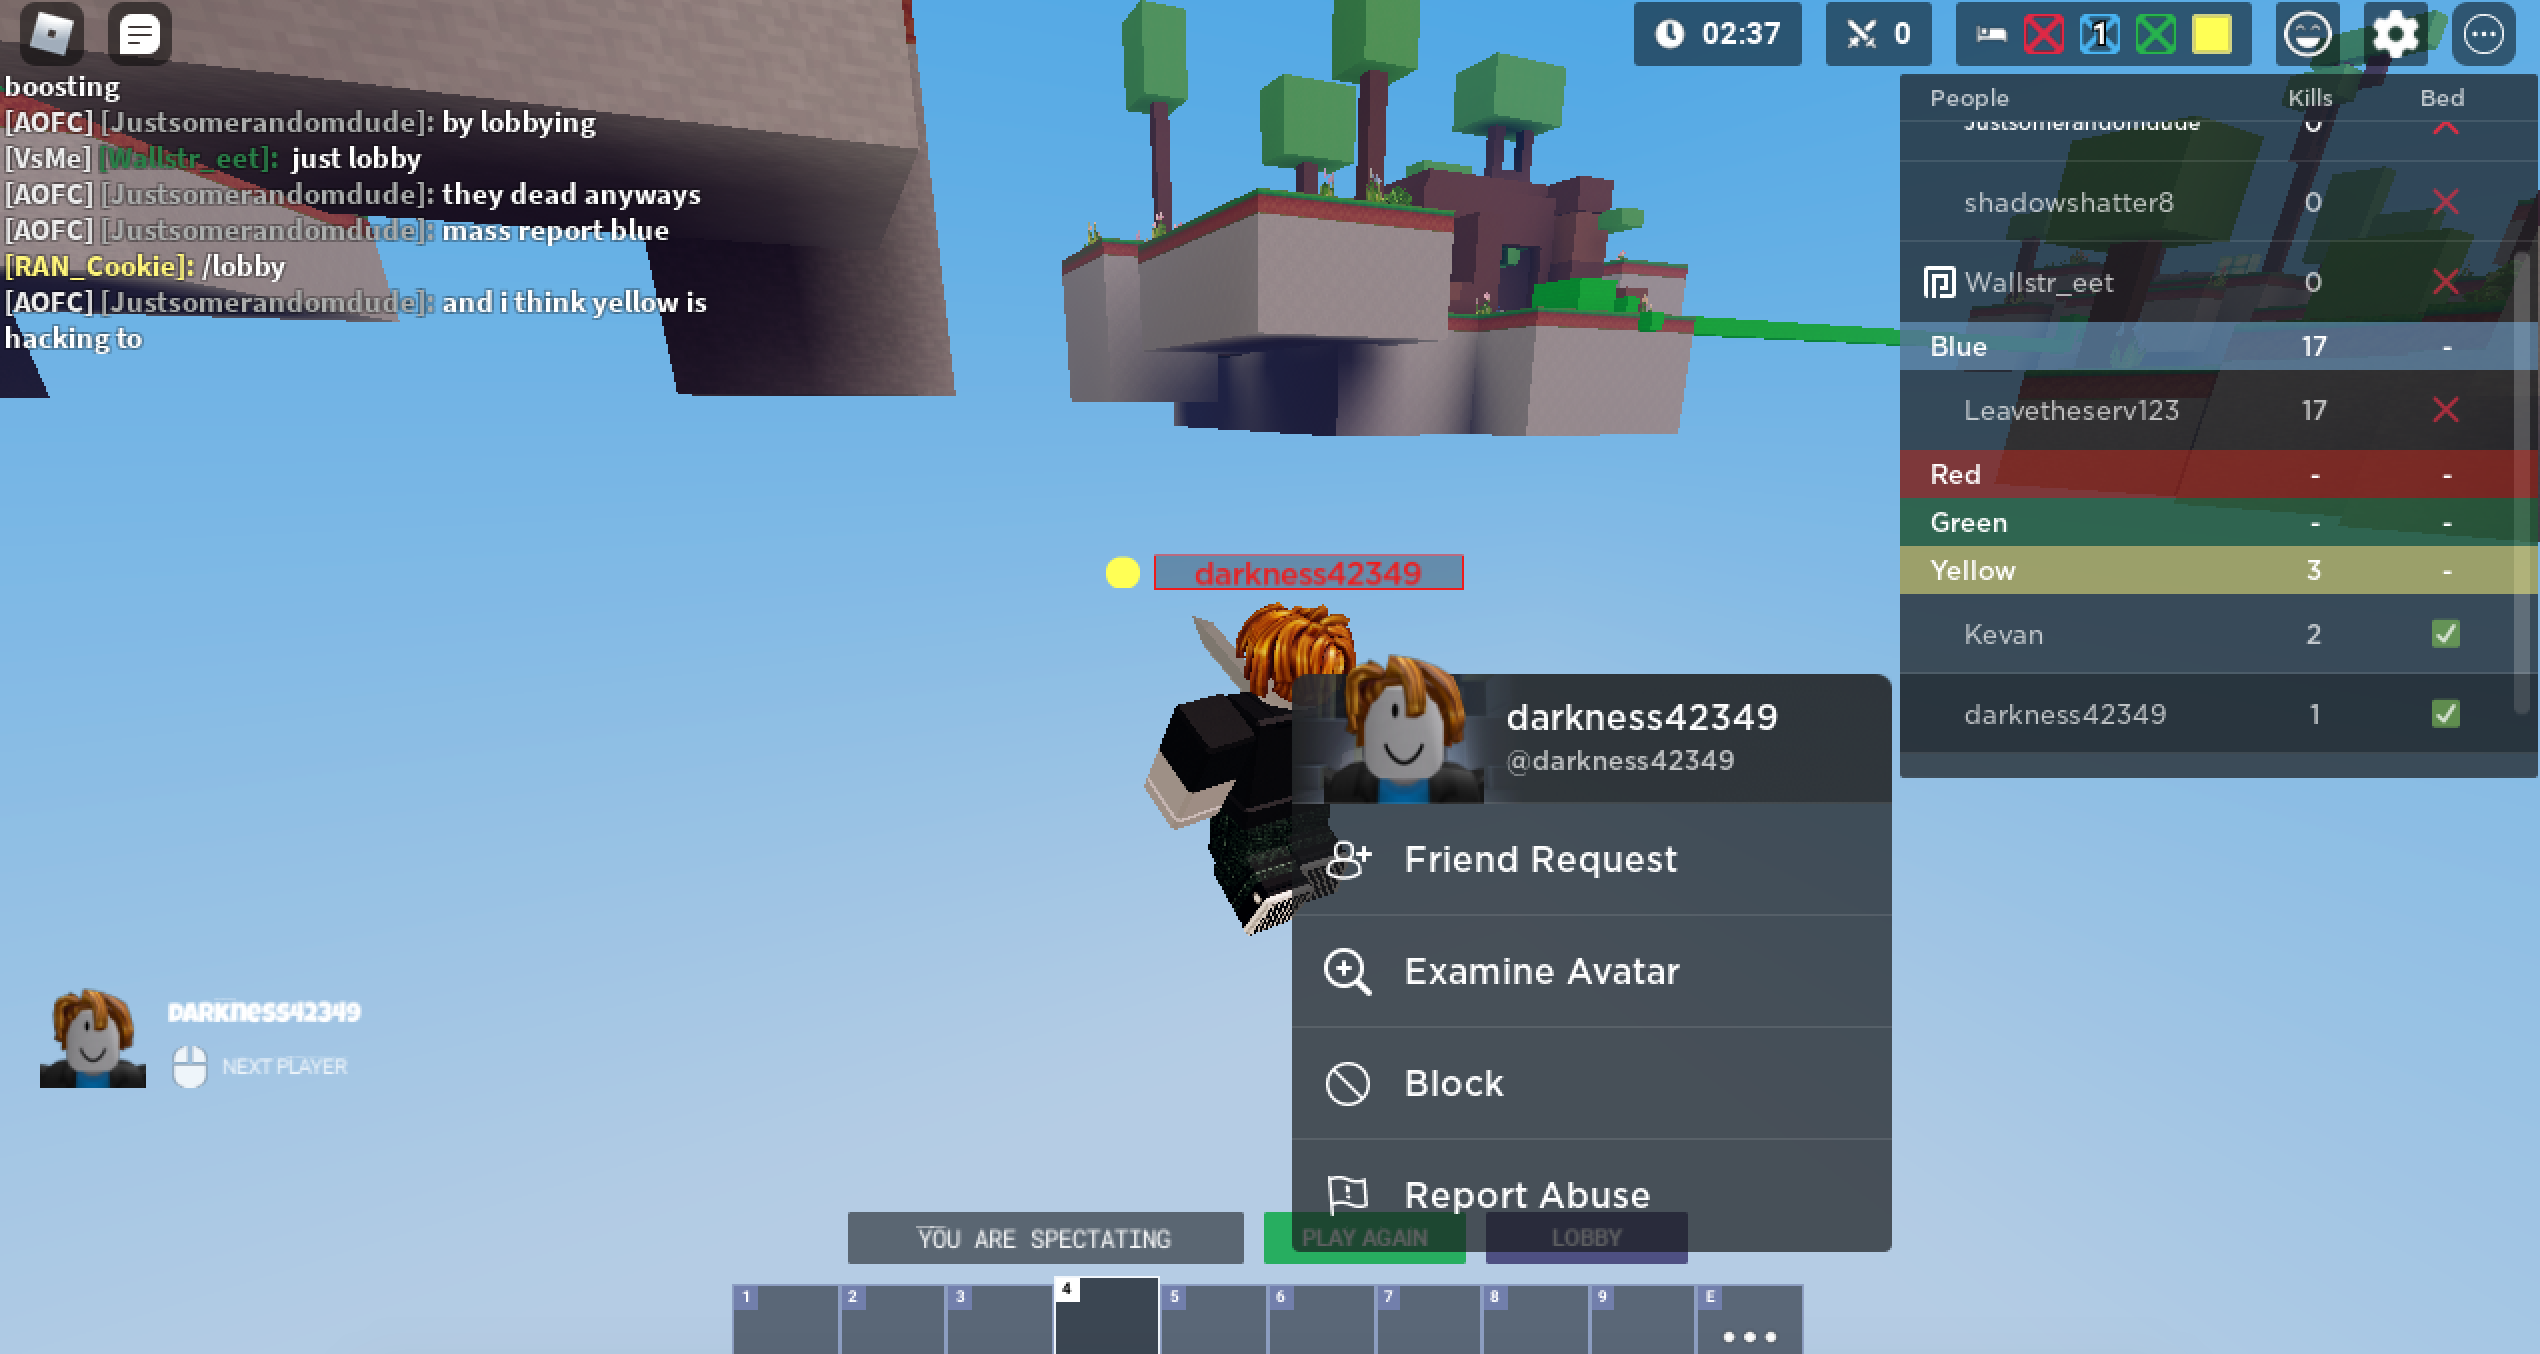 Here's how to report hackers : r/RobloxBedwars